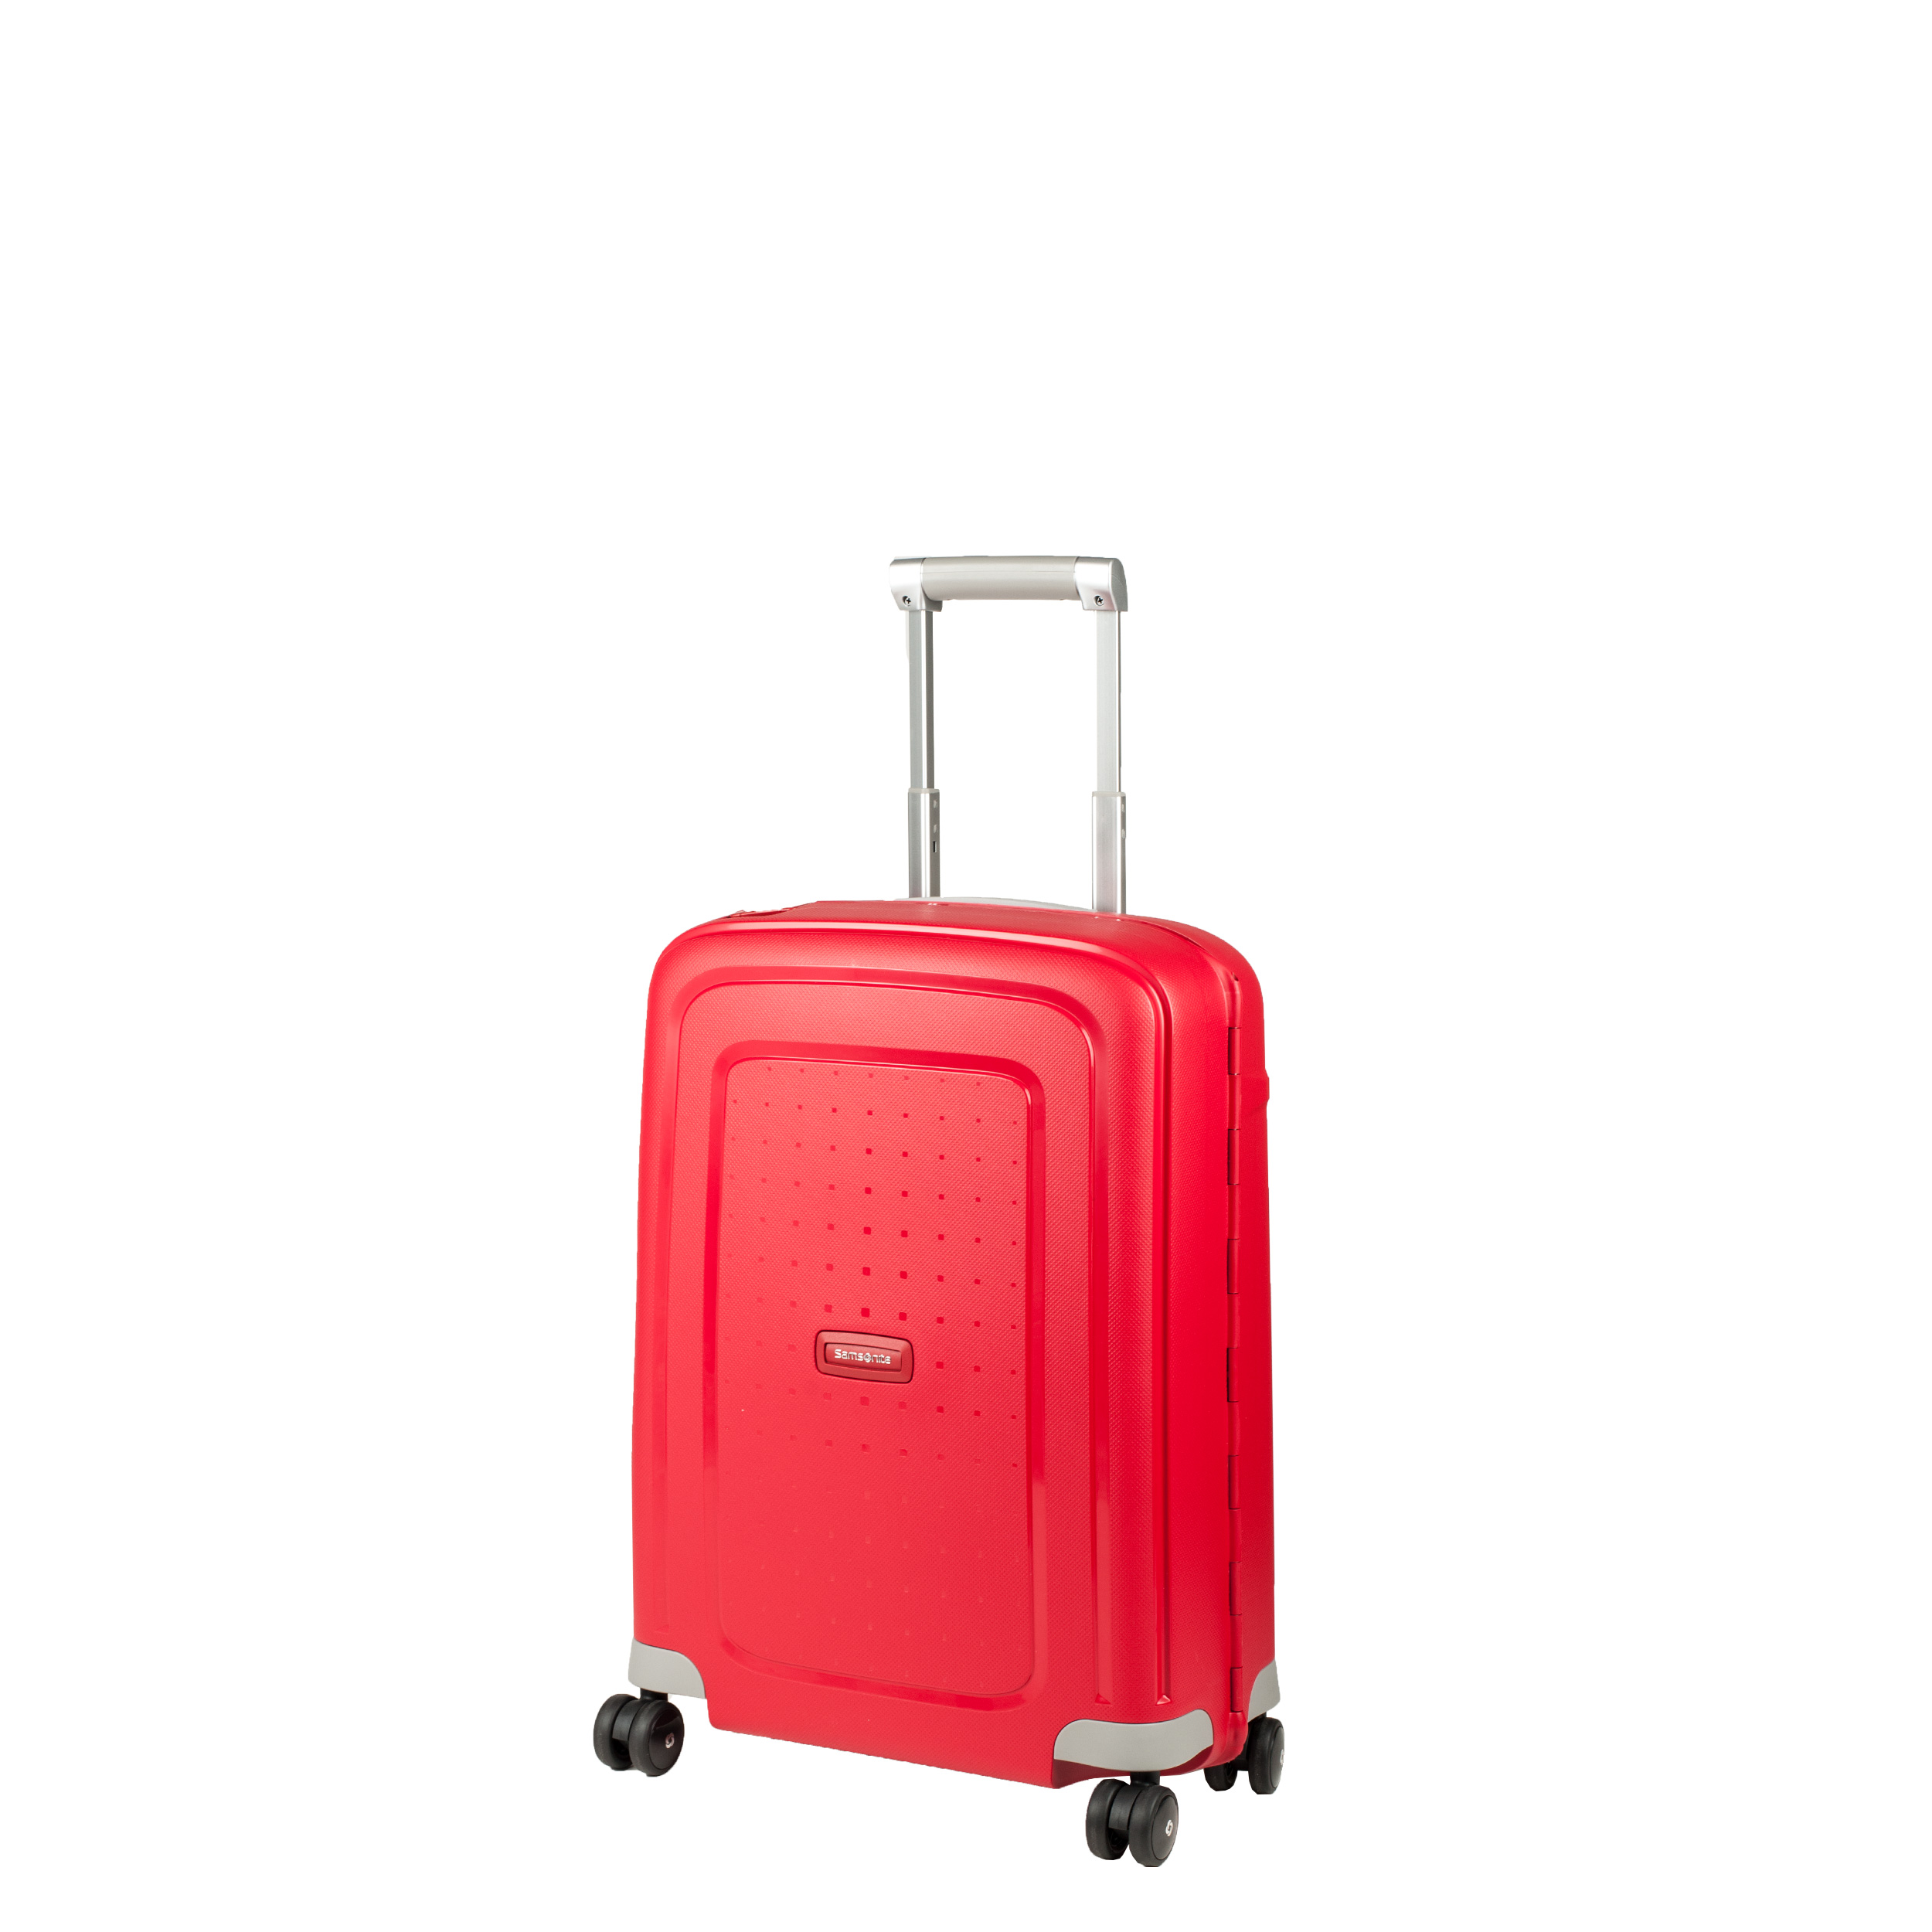 Valise taille cabine 4 roues rigide S cure - 55cm